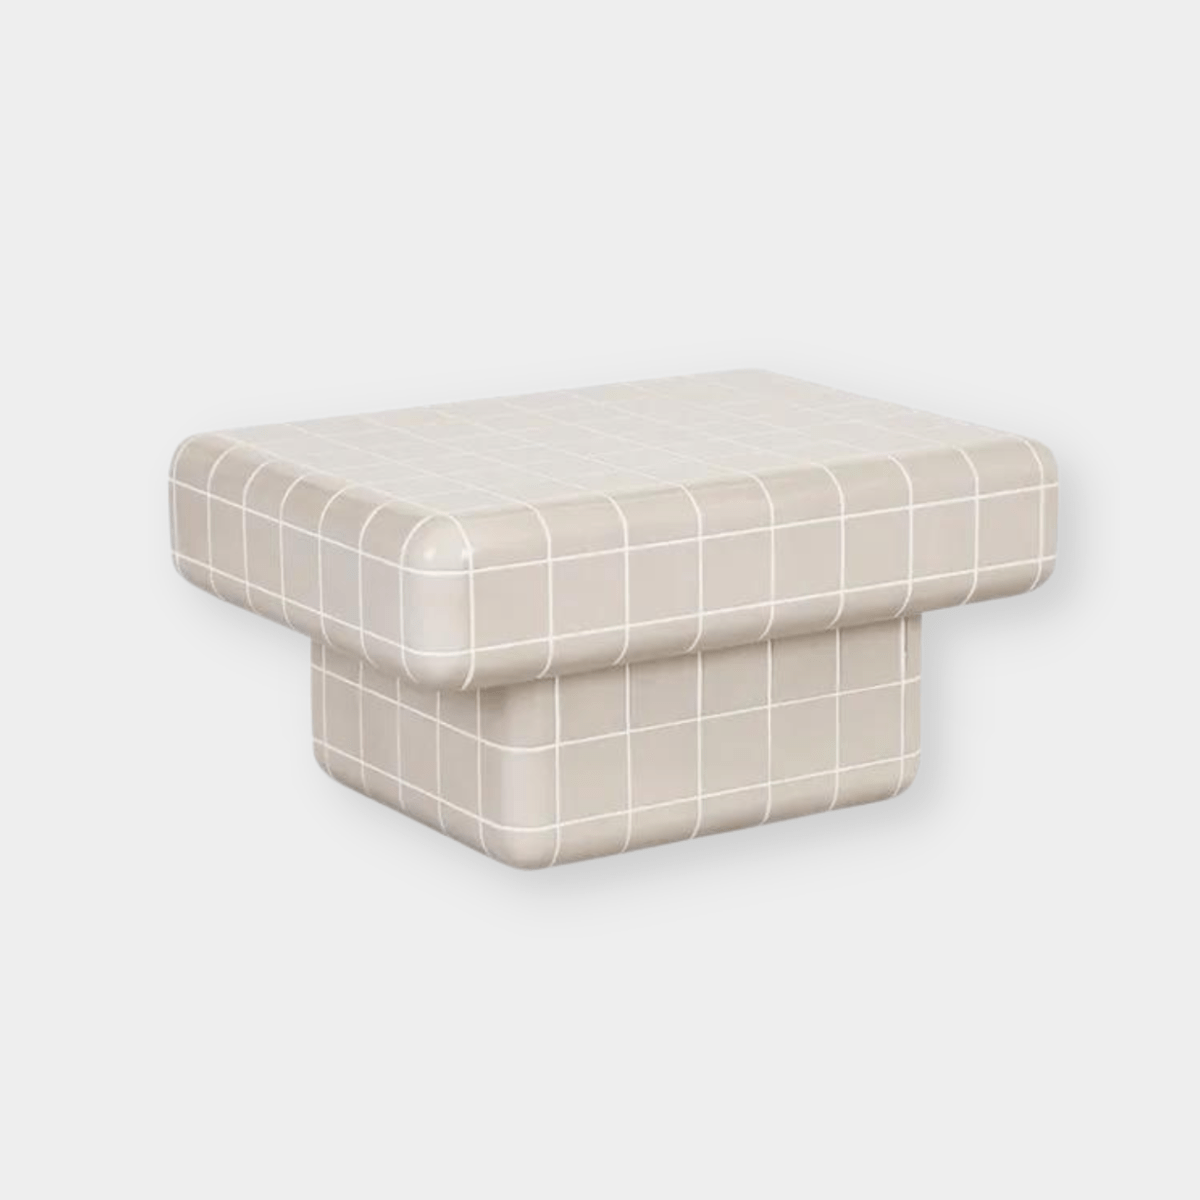 Globe West Coffee Tables Globe West Seville Tile Coffee Table, Pearl White (7953893032185)